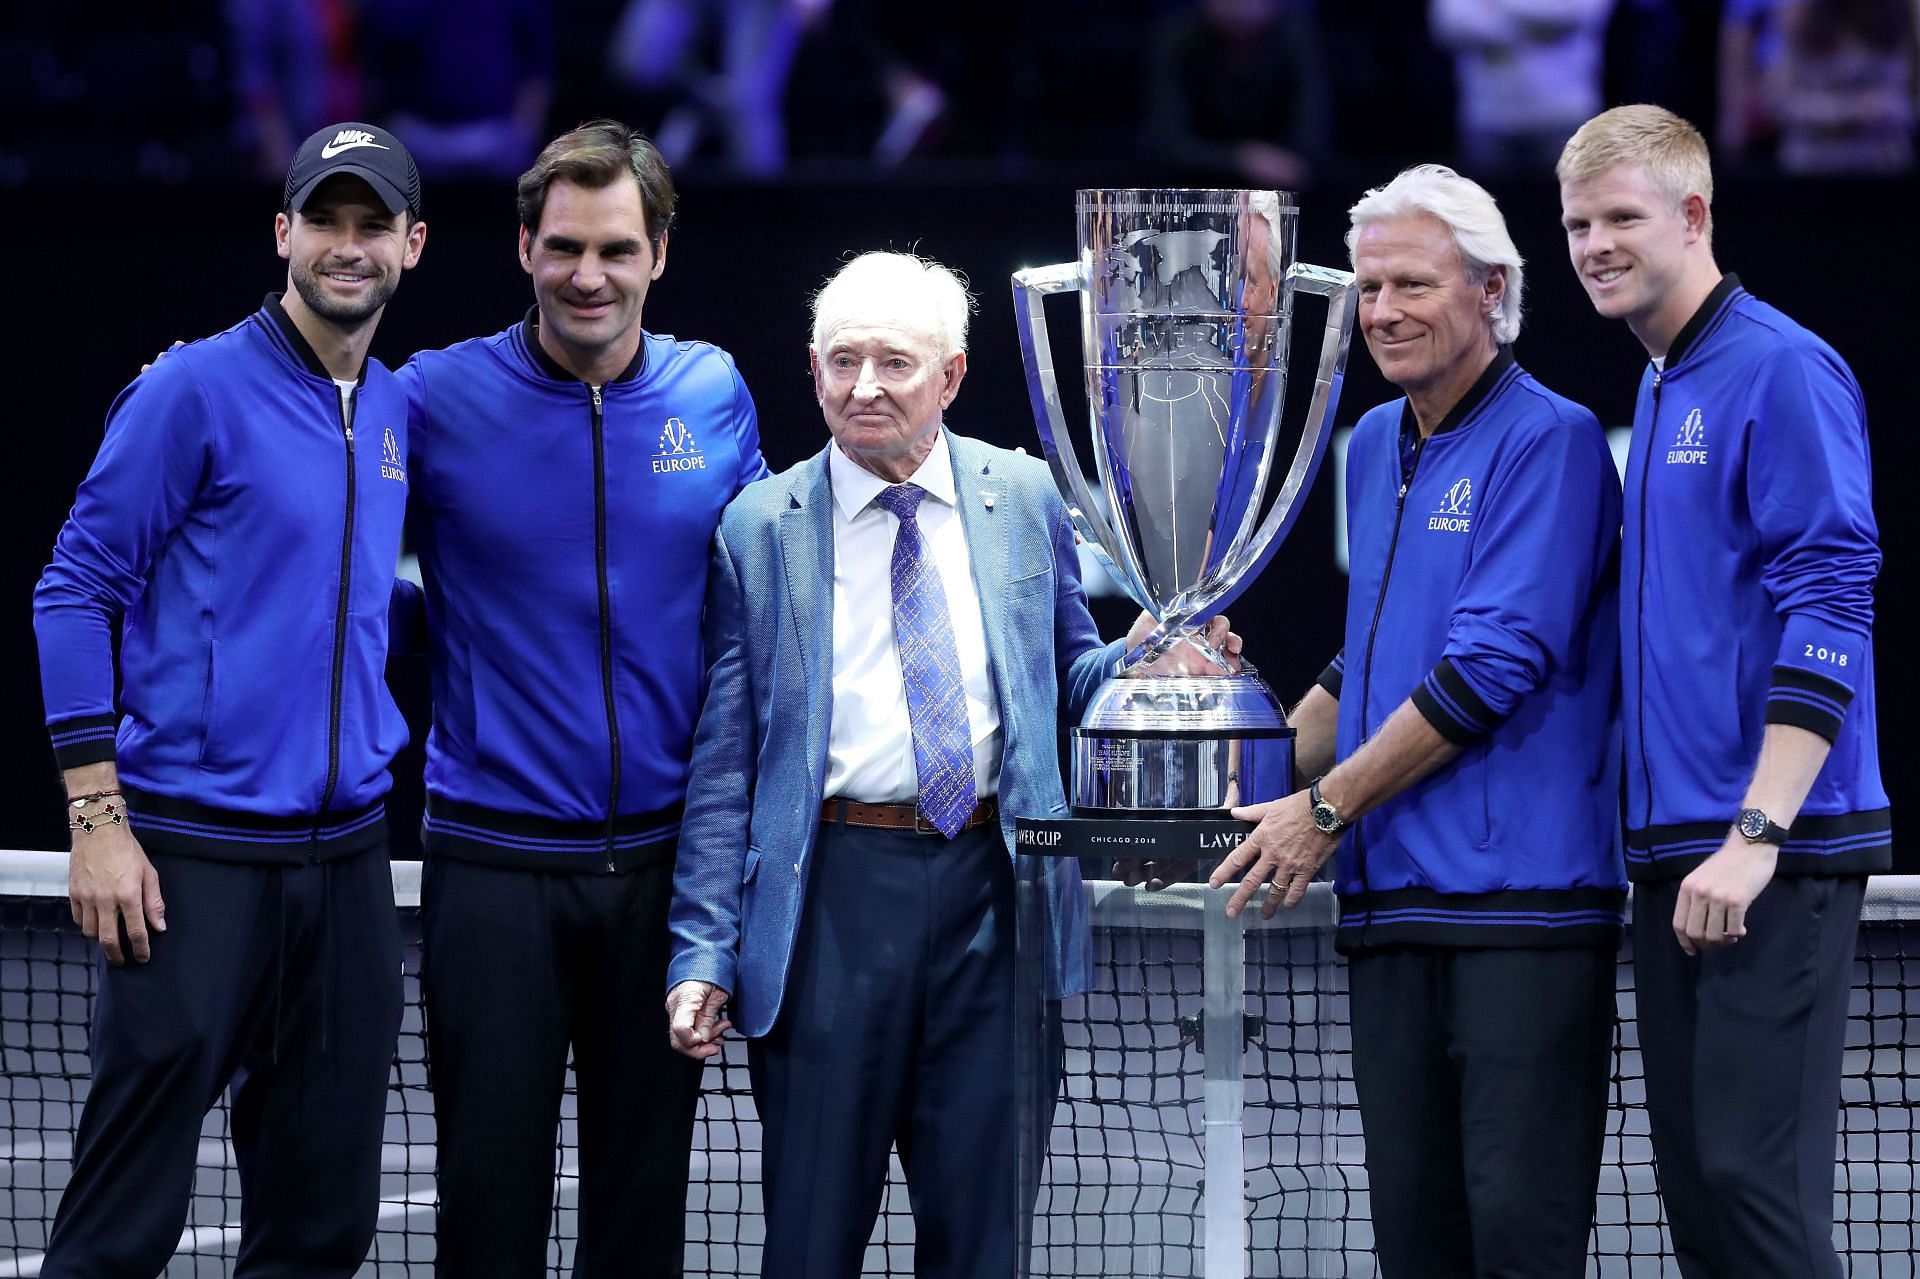 Roger Federer led Team Europe to their second Laver Cup title in 2018